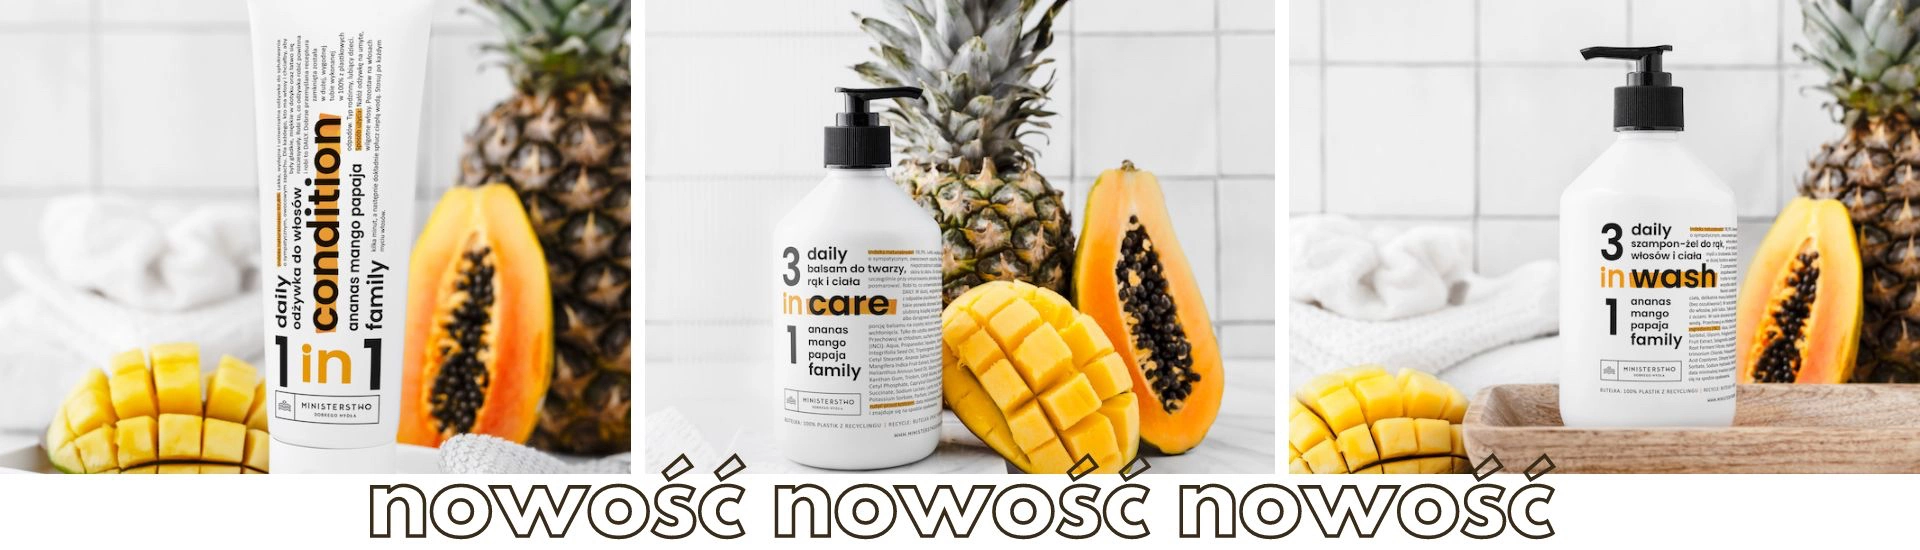 Nowosc-Daily